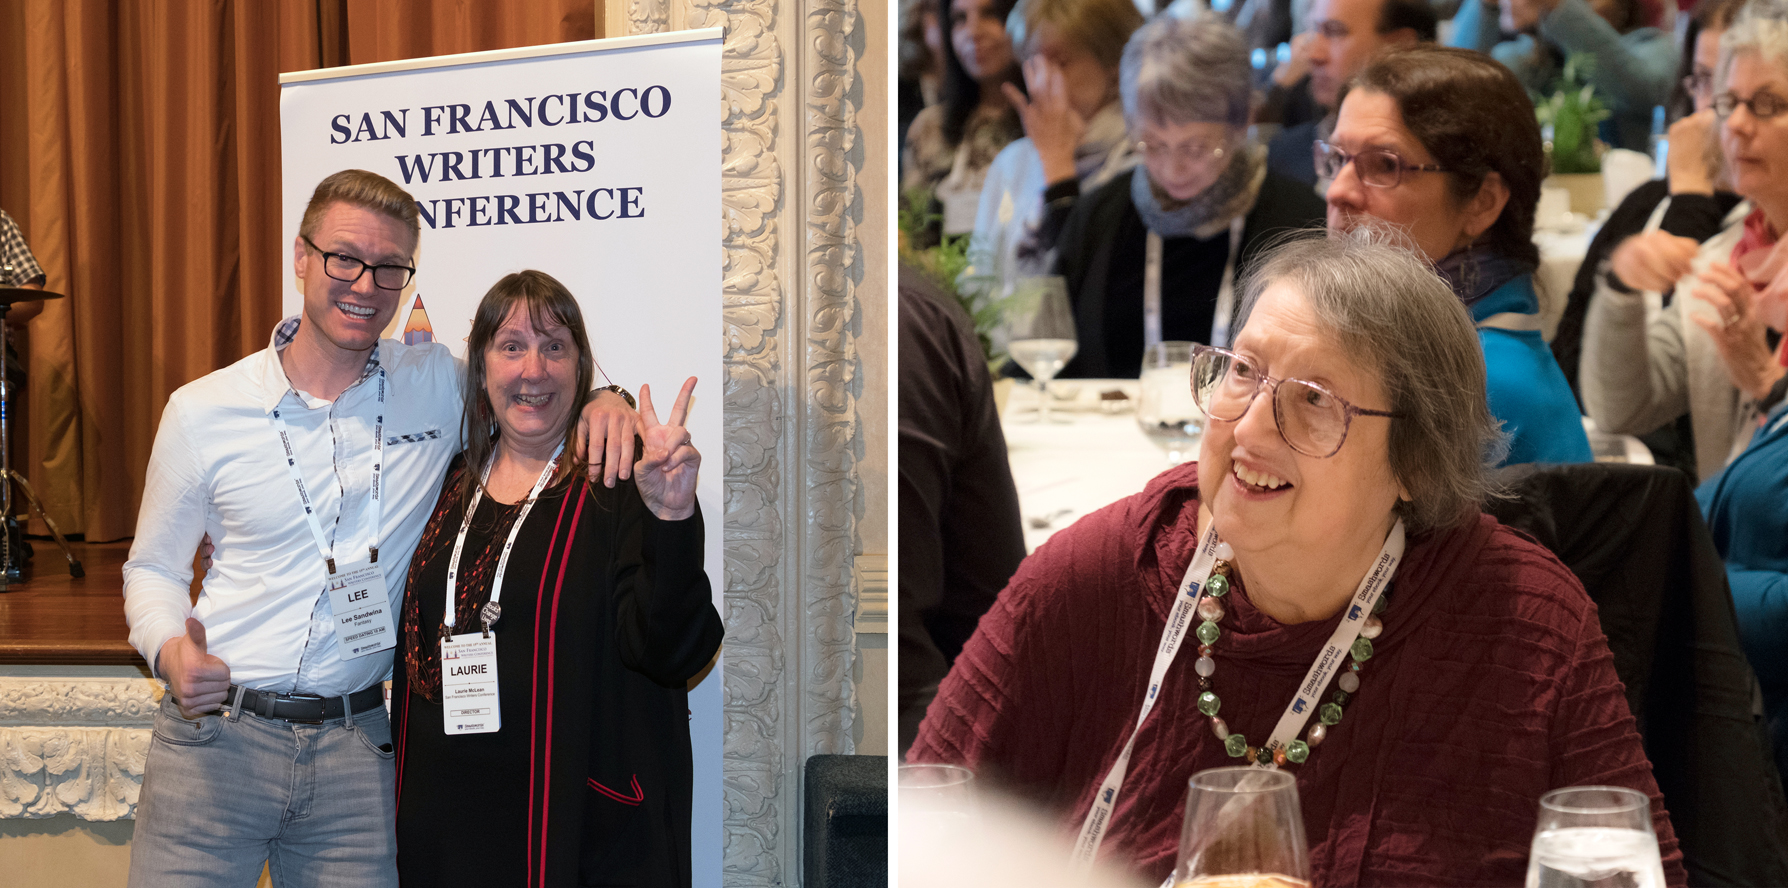 San Francisco Writers Conference